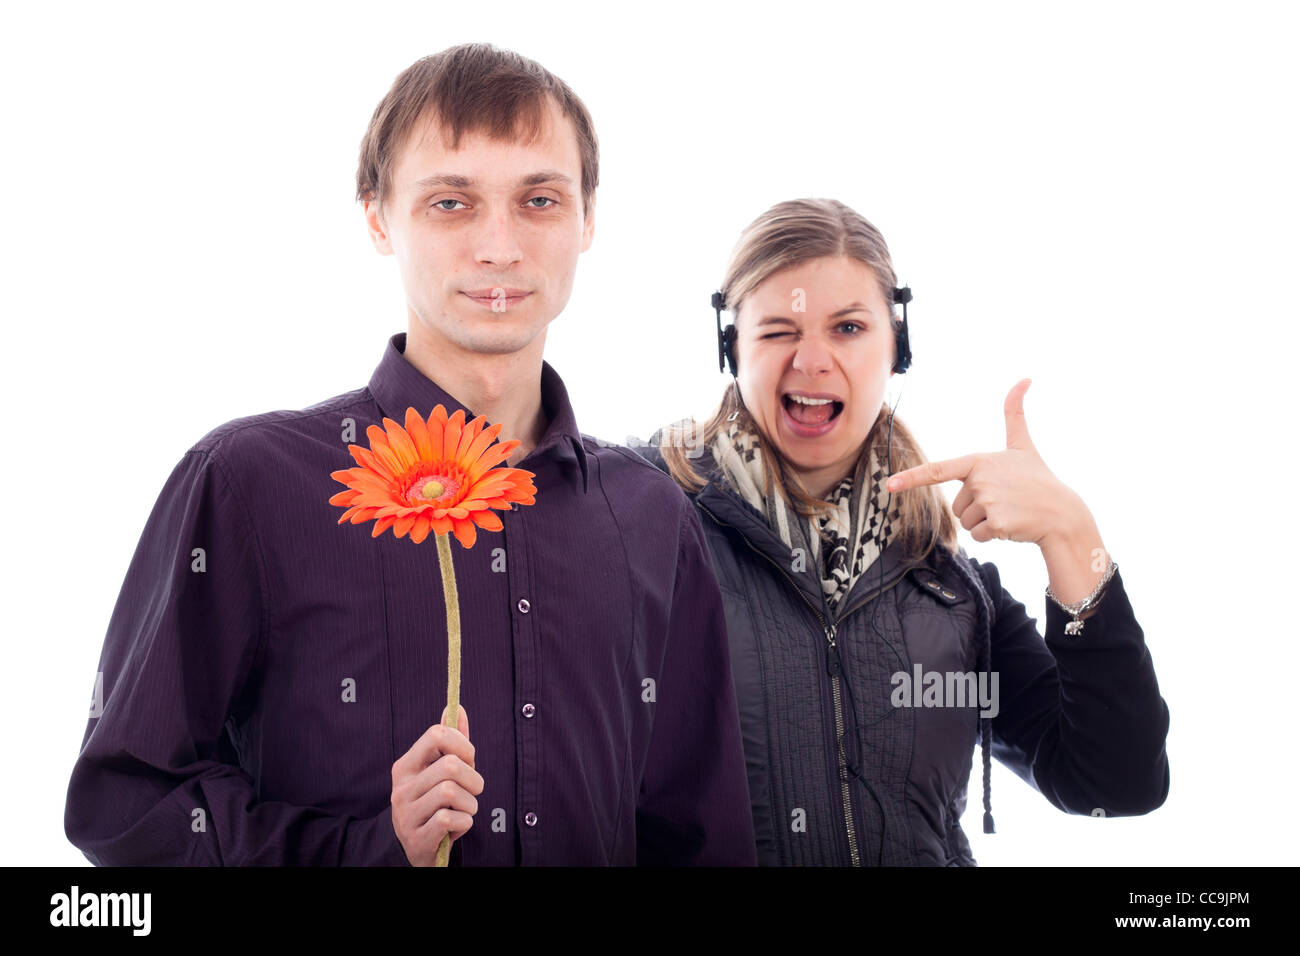 Funny geek man holding flower and rebel woman pointing at him, isolated on white background. Stock Photo